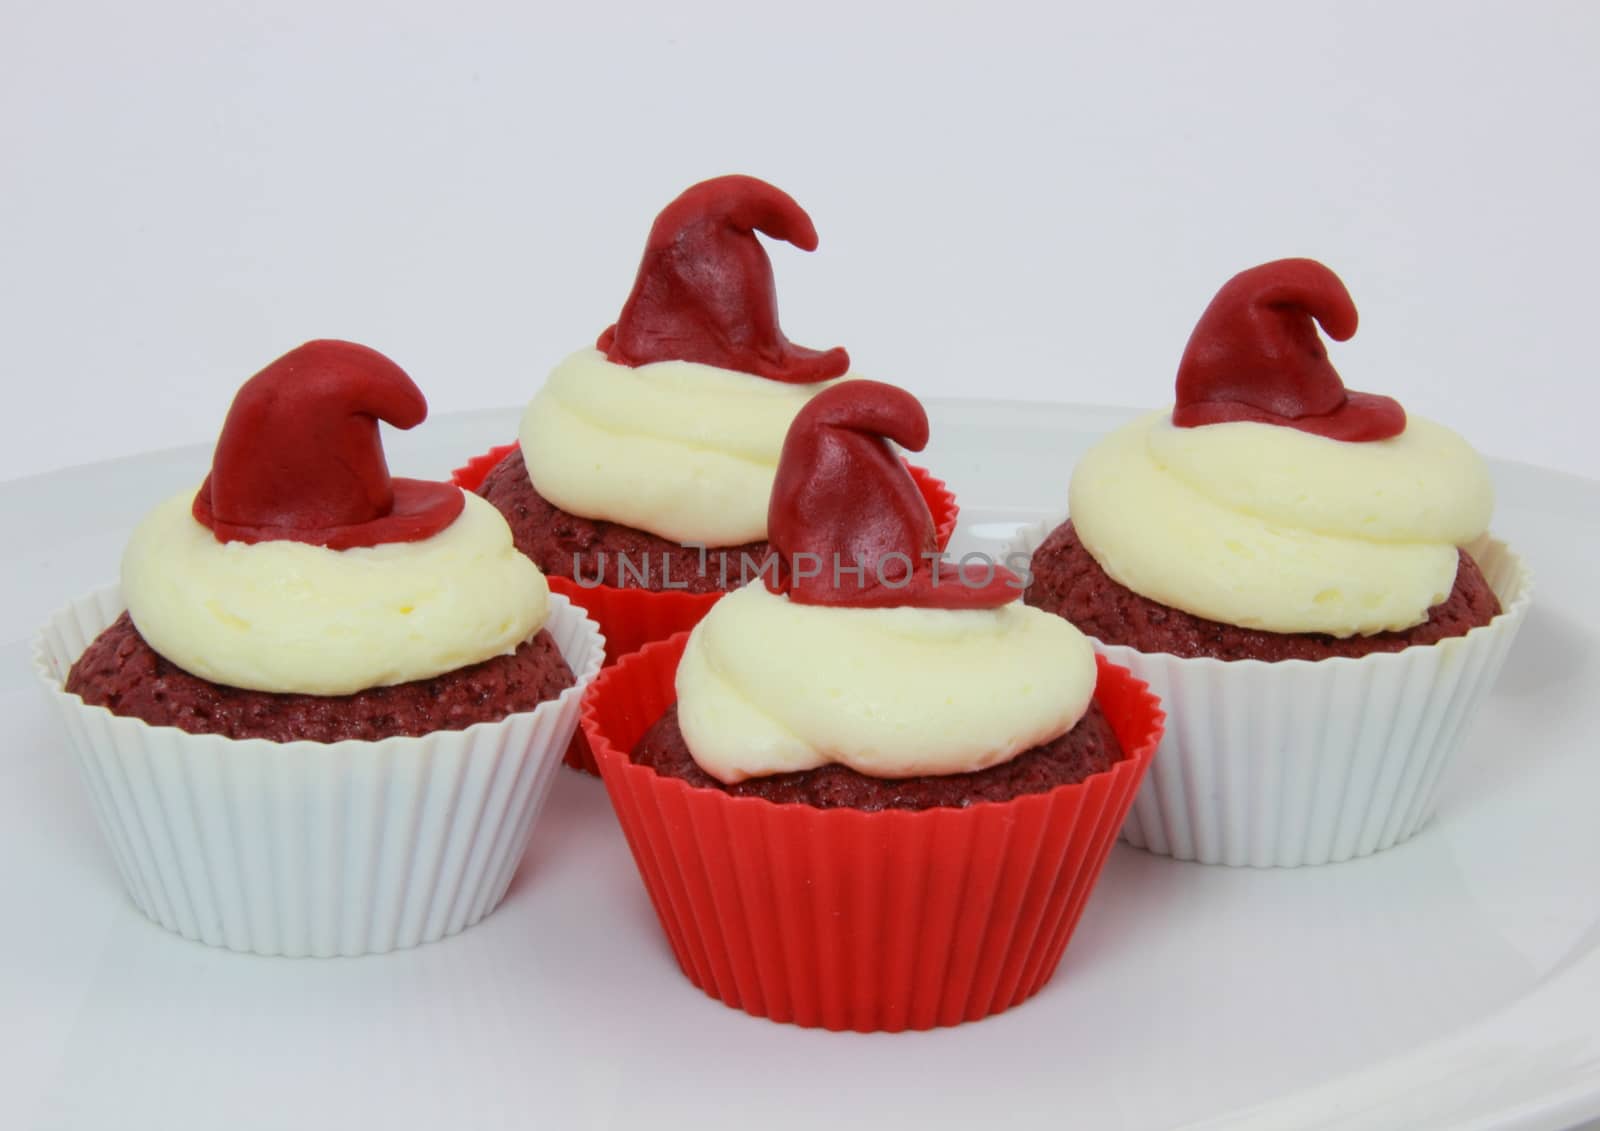 Selection of red velvet cupcakes with cream cheese frosting